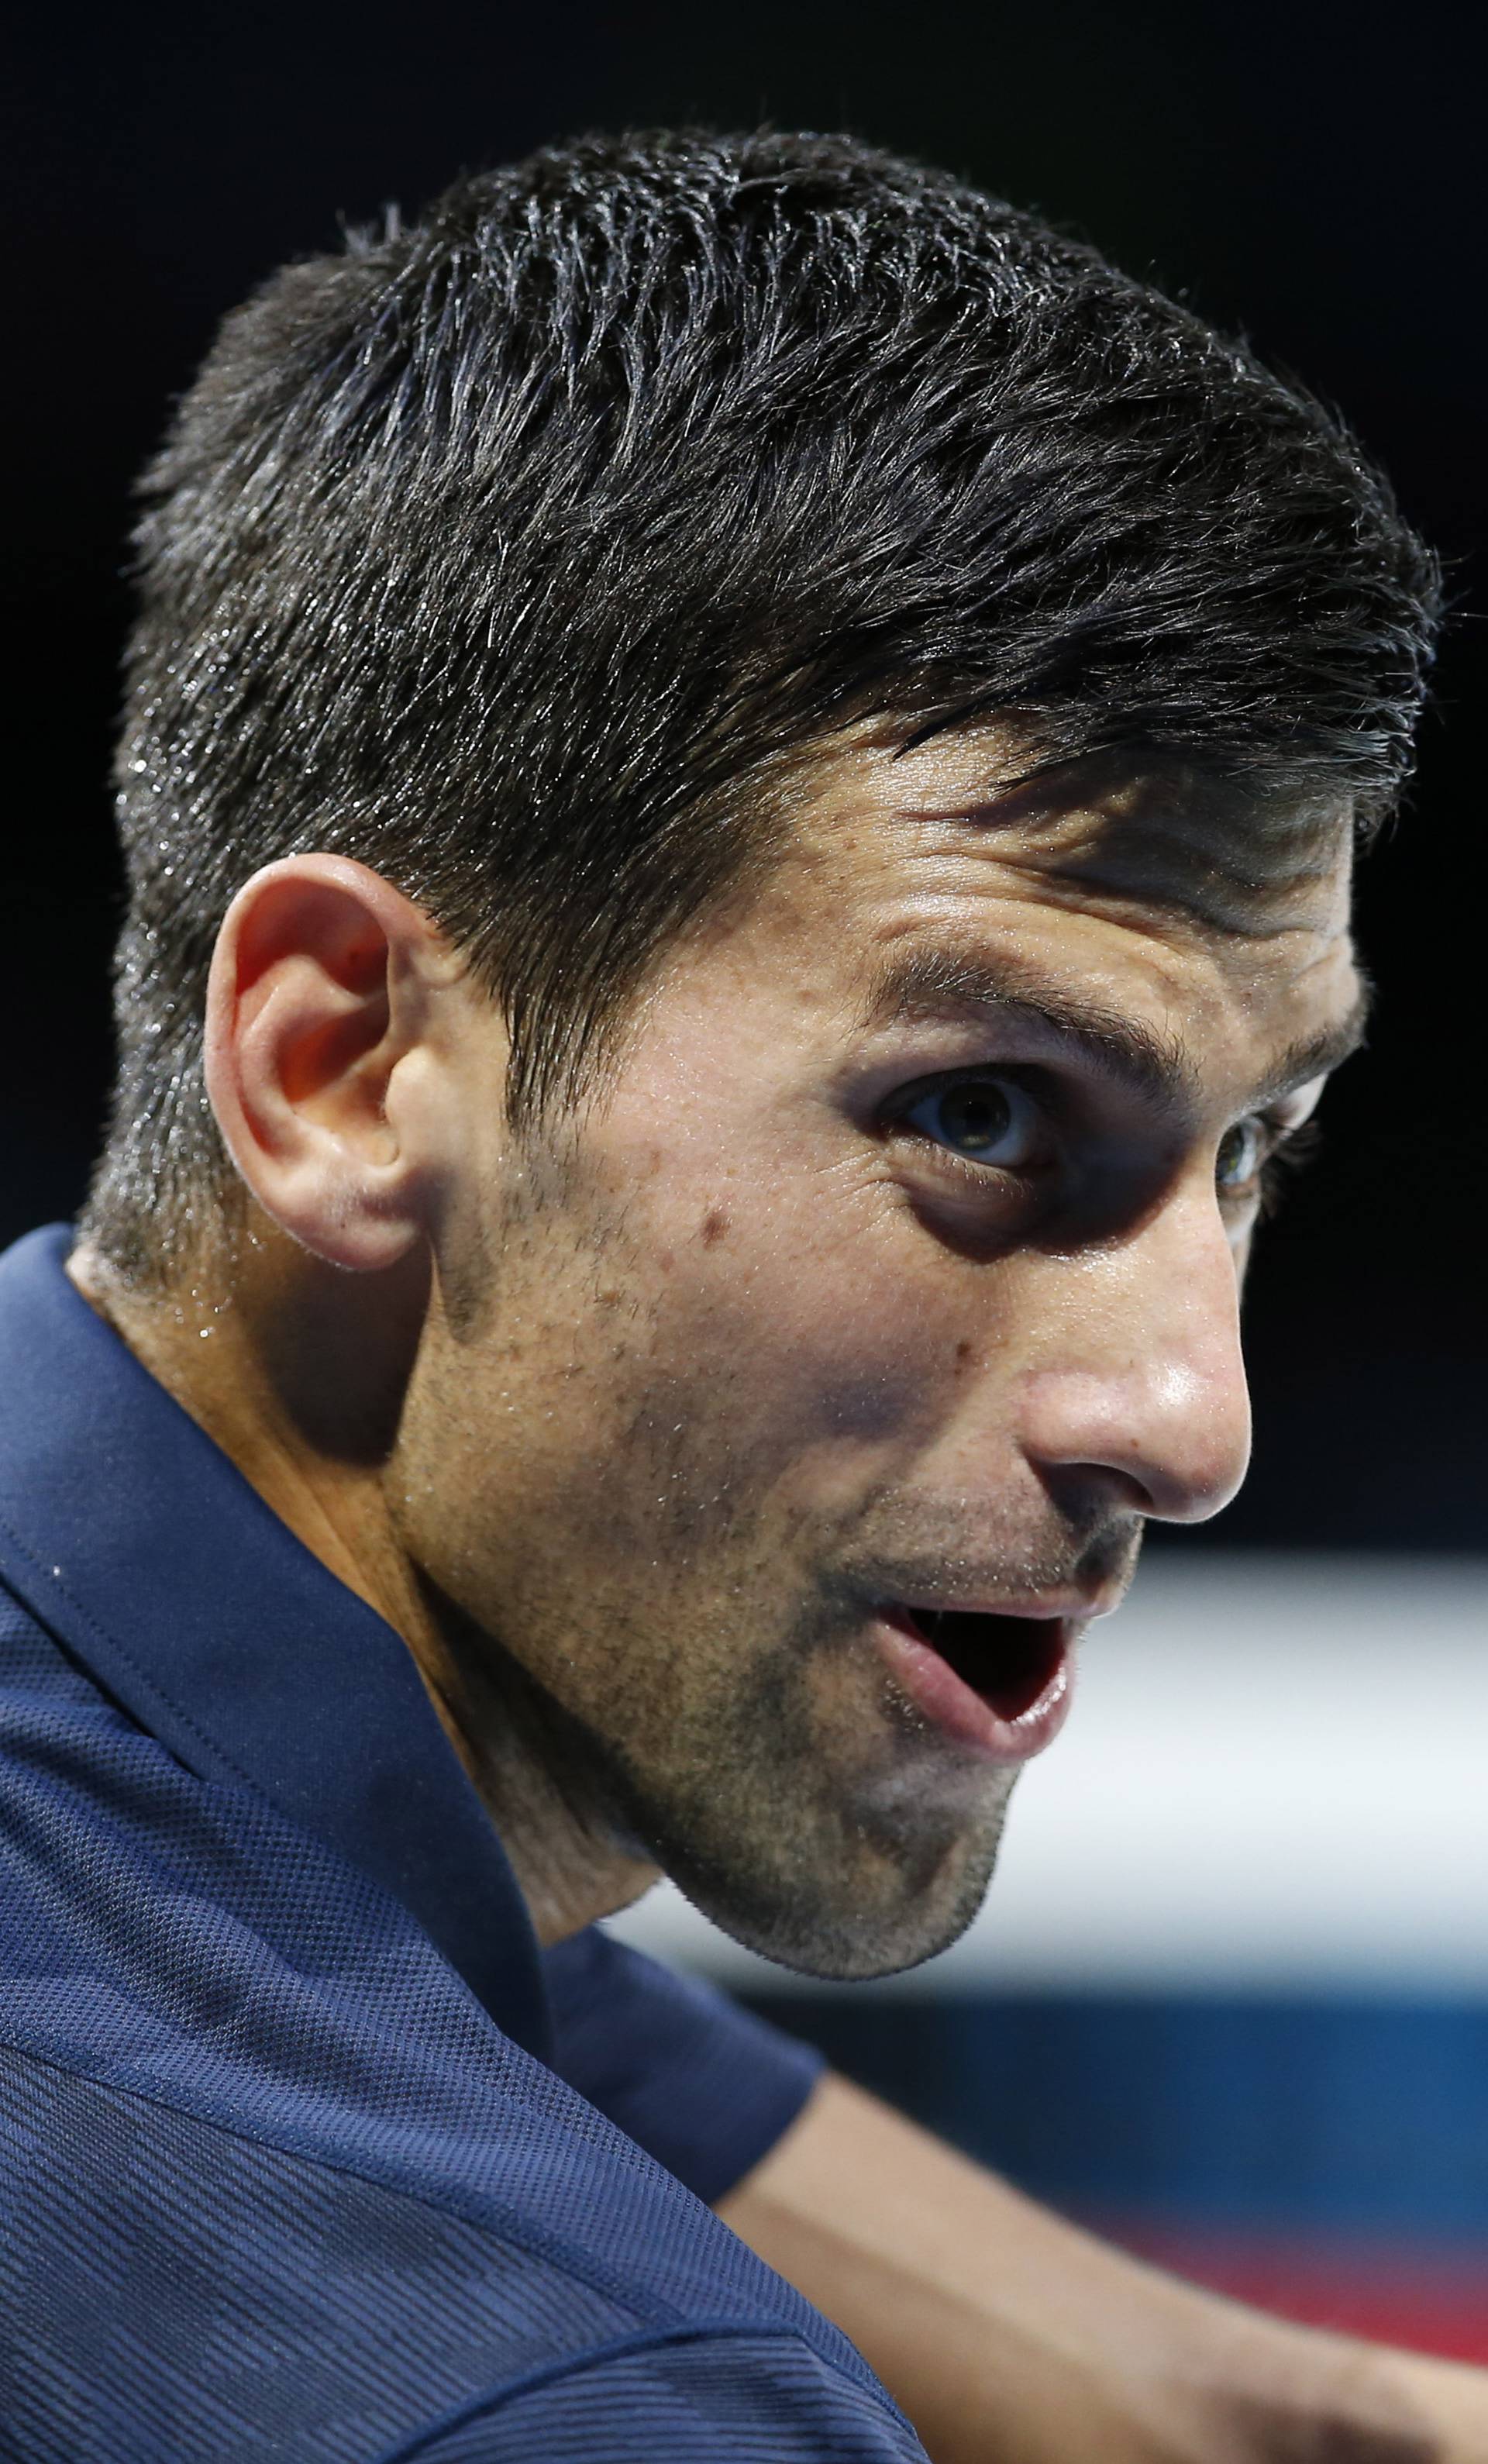 Serbia's Novak Djokovic gestures to the match referee after he was given a time violation warning during his round robin match with Belgium's David Goffin